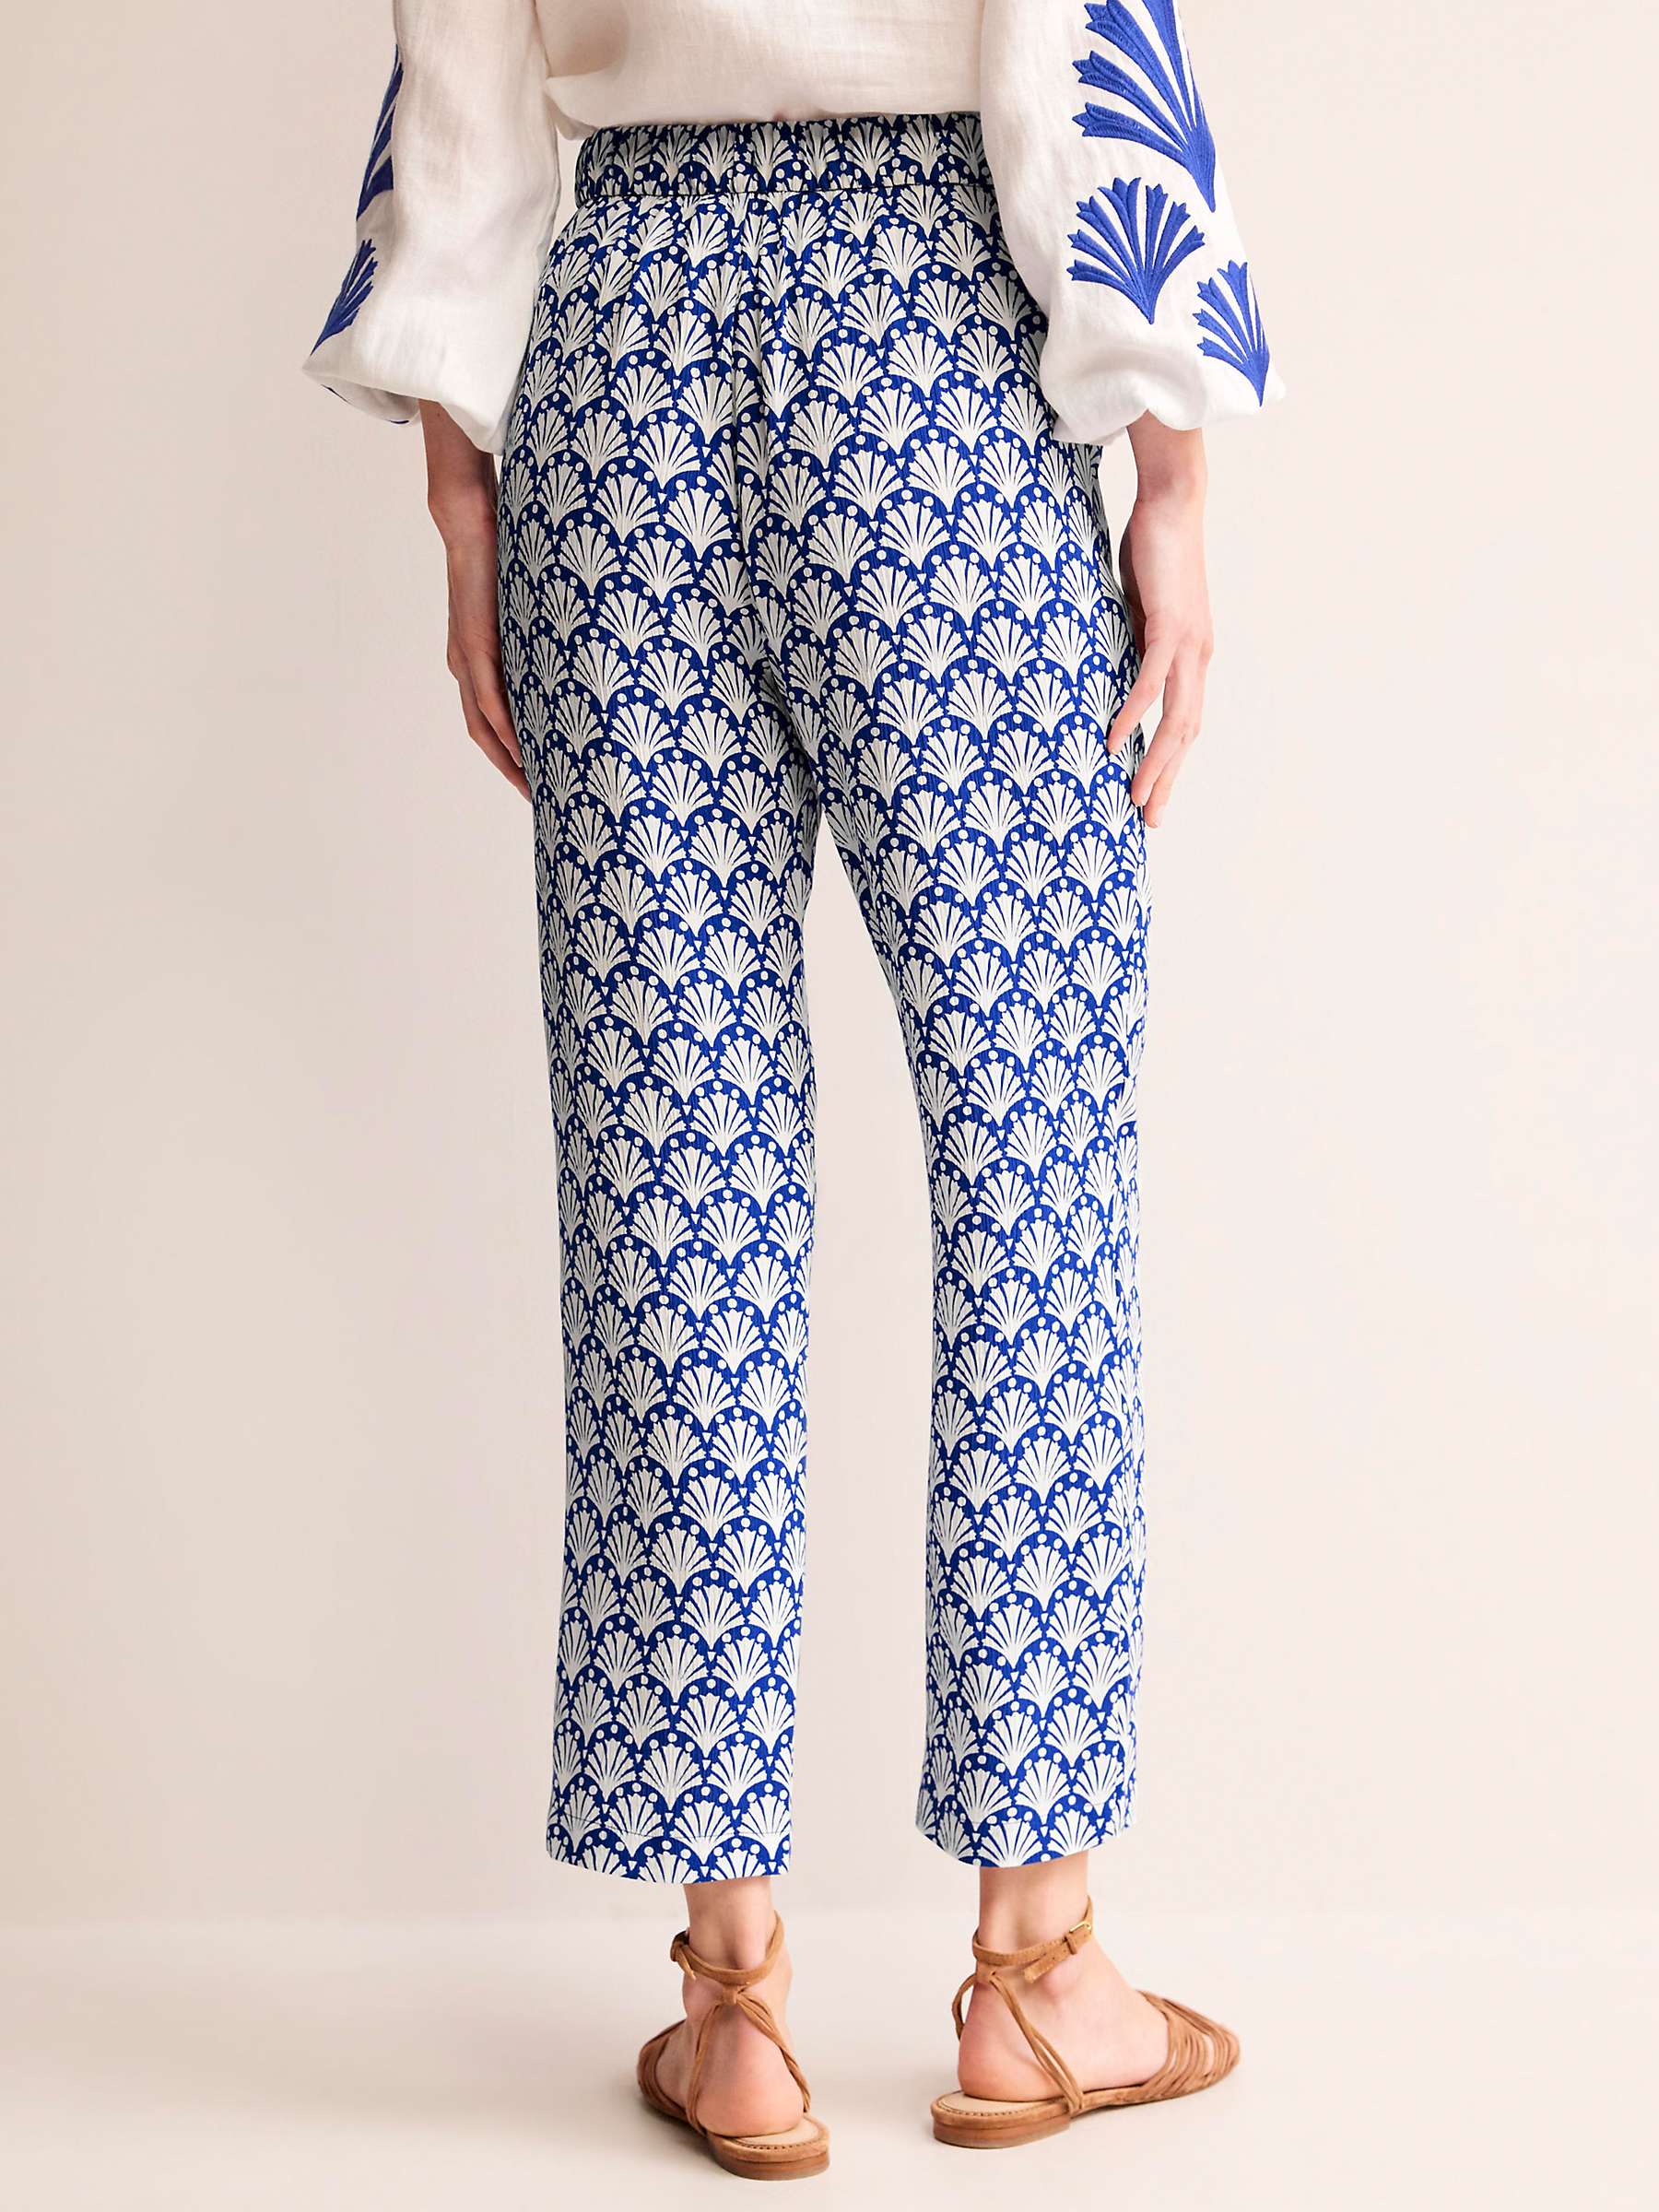 Buy Boden Shells Print Crinkle Tapered Trousers, Ivory/Blue Online at johnlewis.com